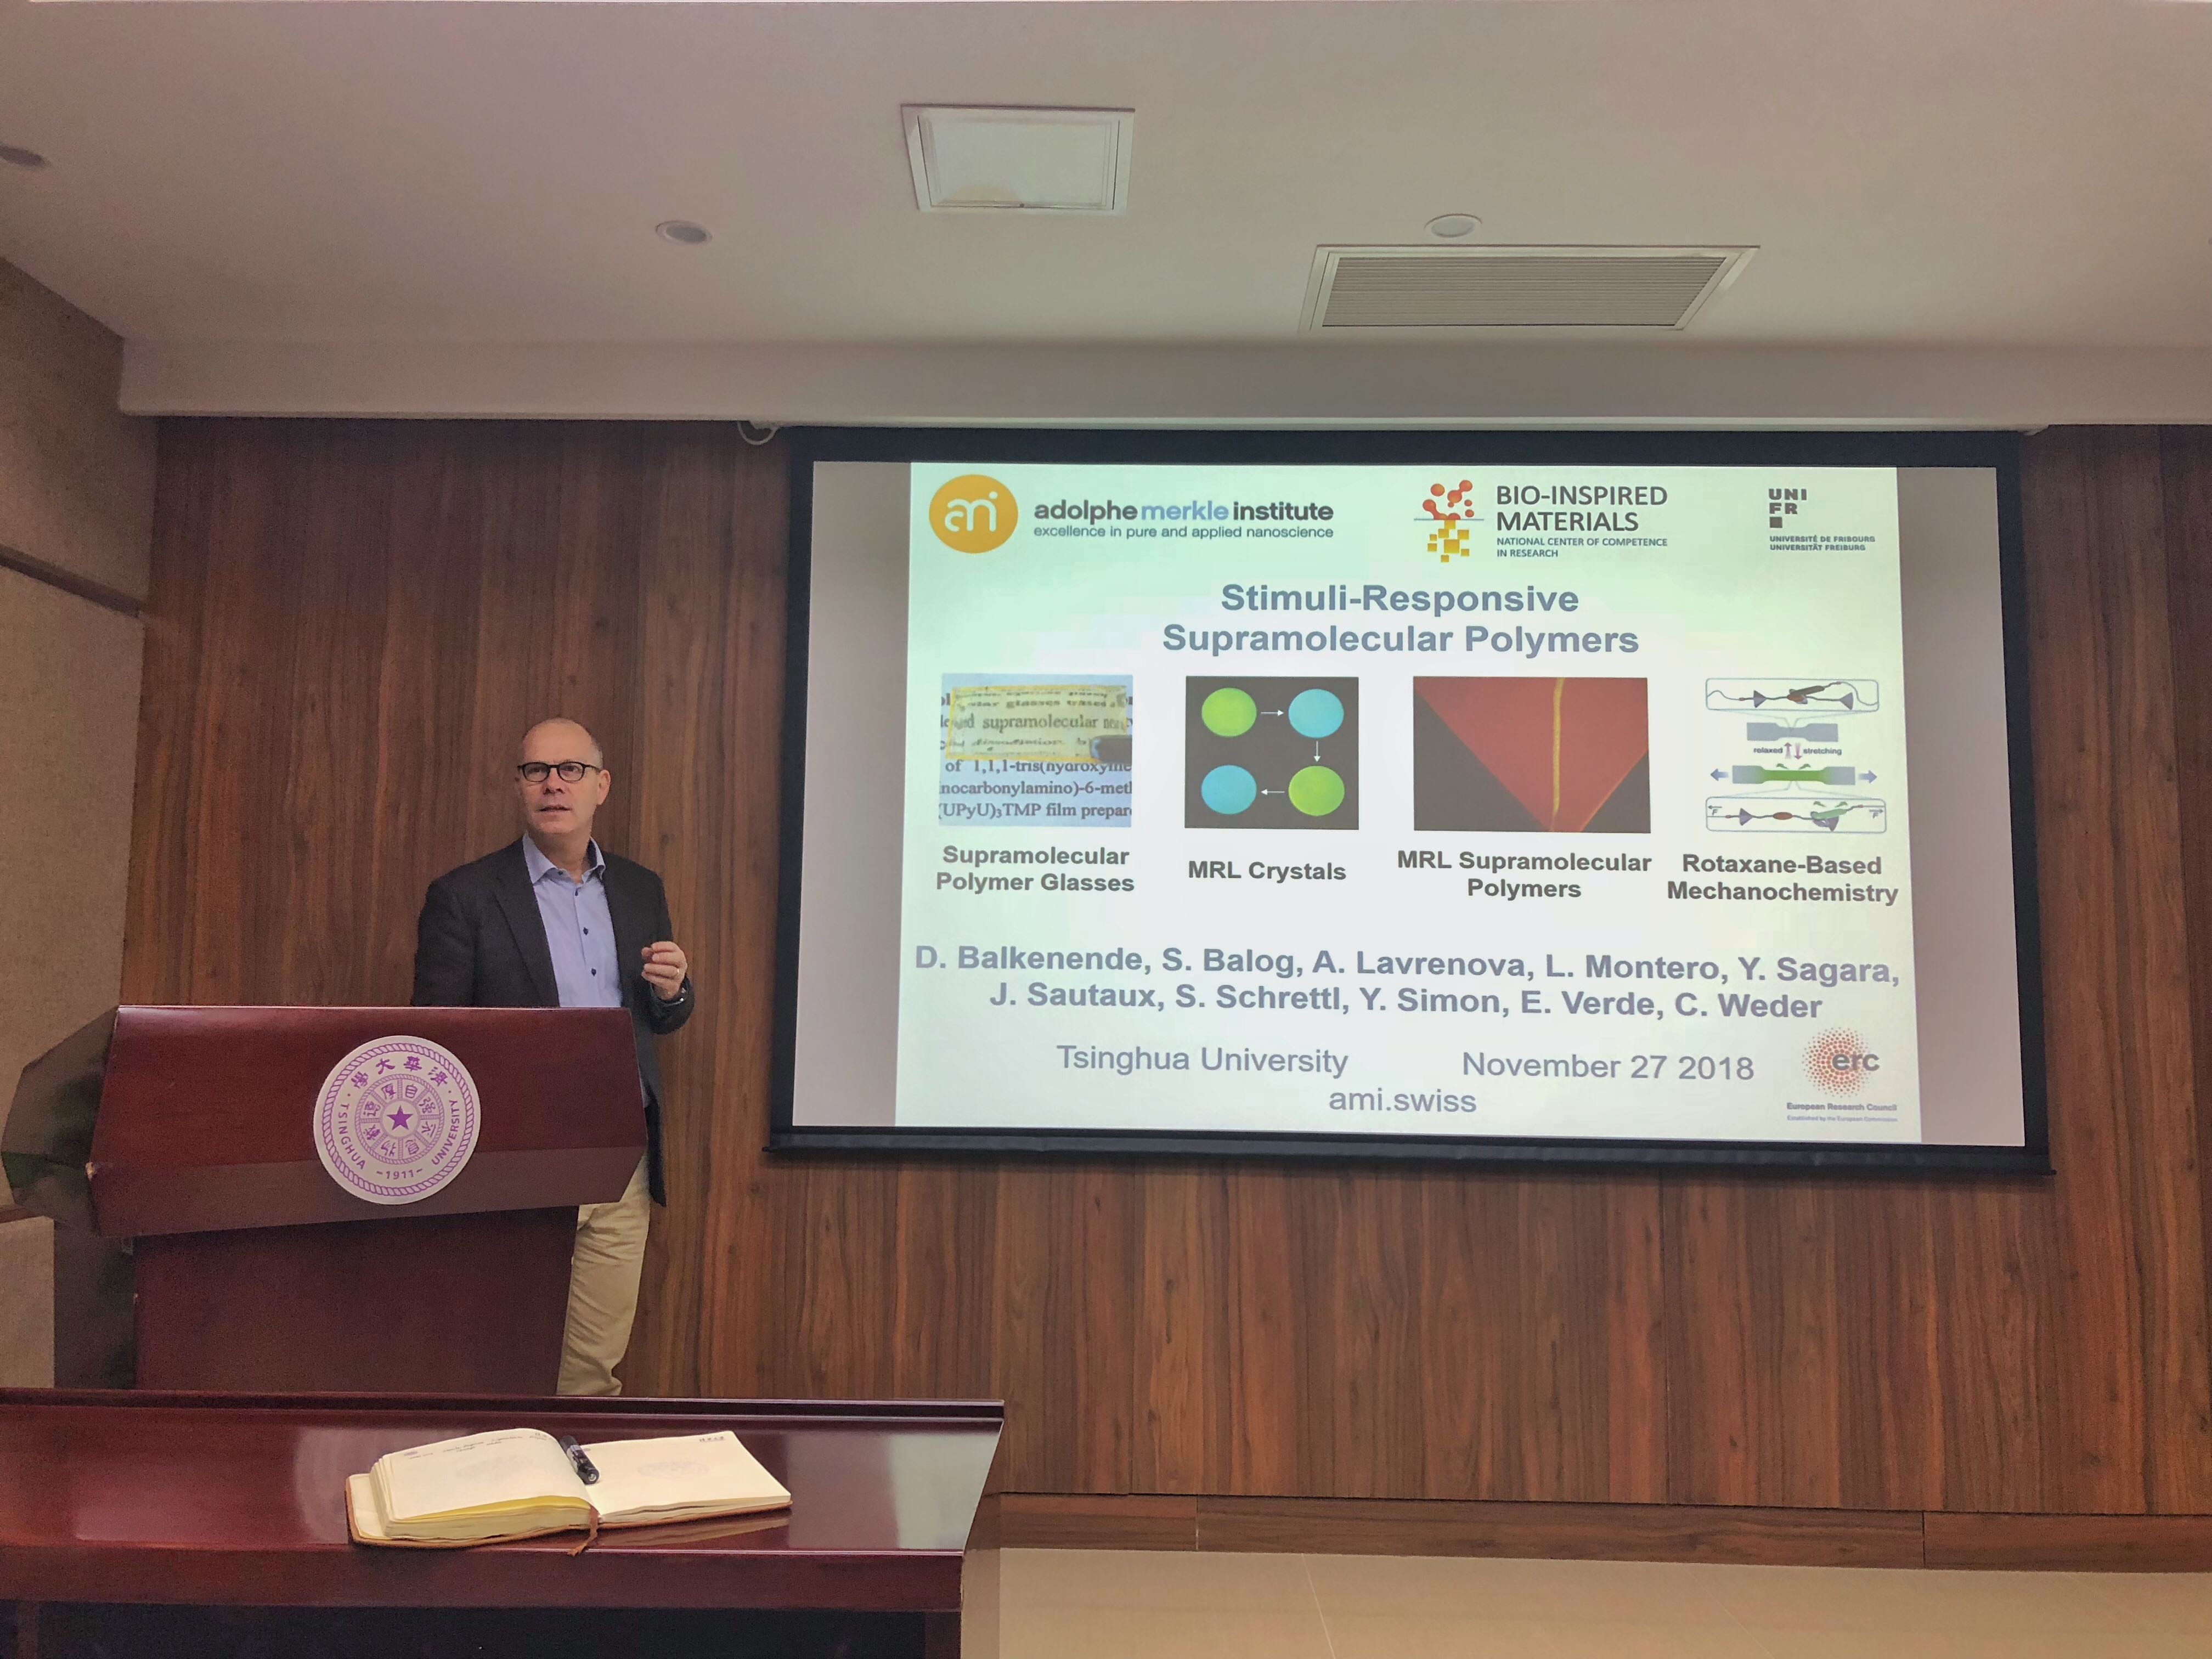 Prof. Christoph Weder visited Tsinghua University and gave a lecture